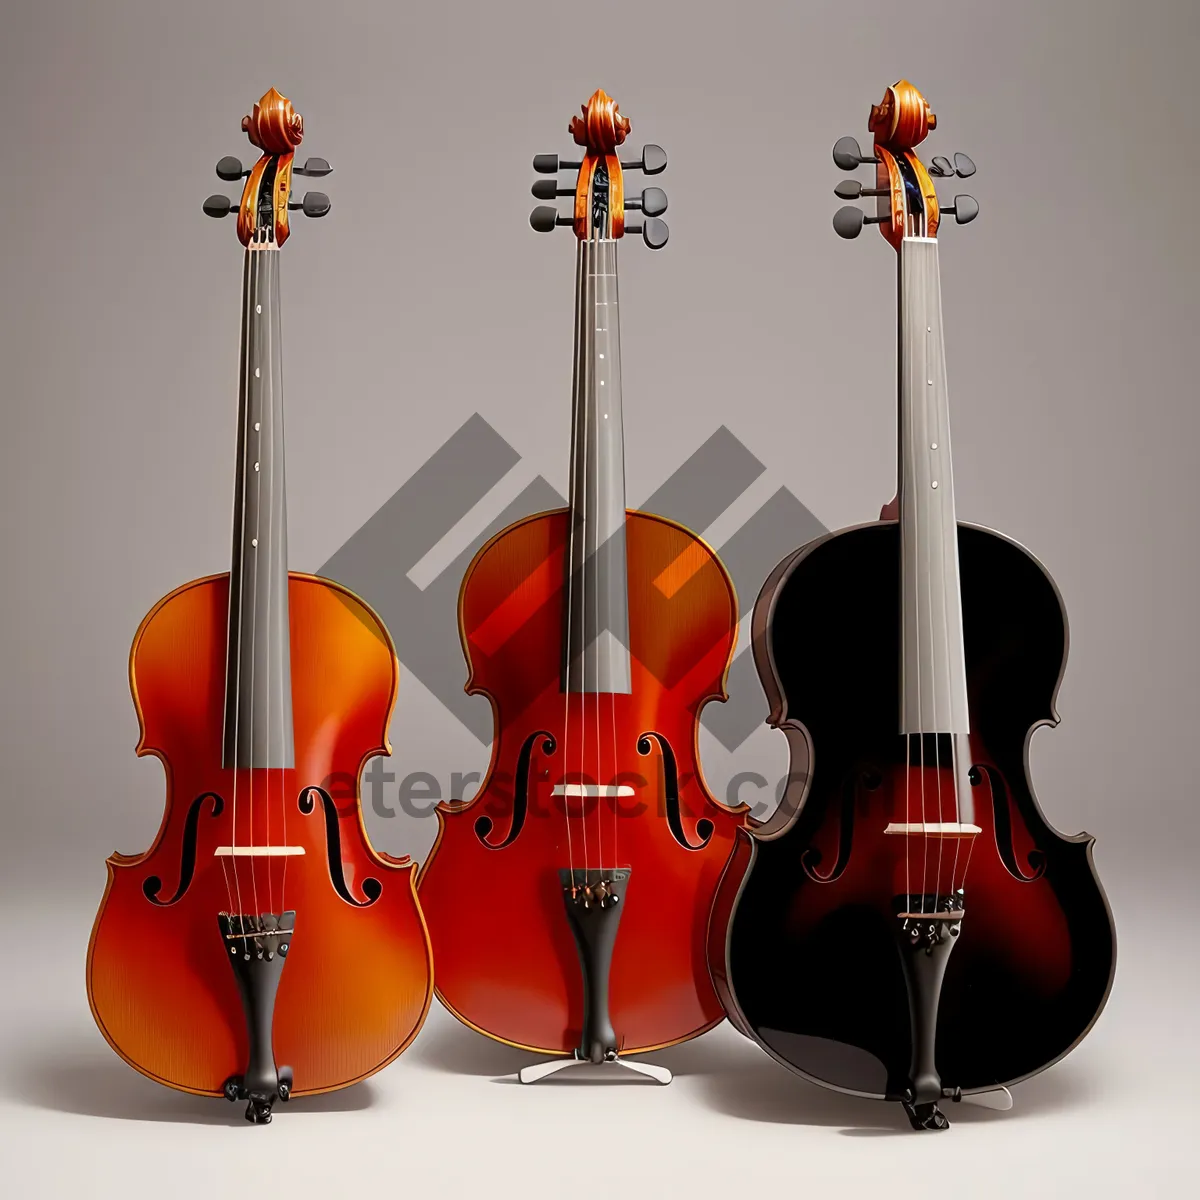 Picture of Melodic Strings: A harmonious blend of musical craftsmanship